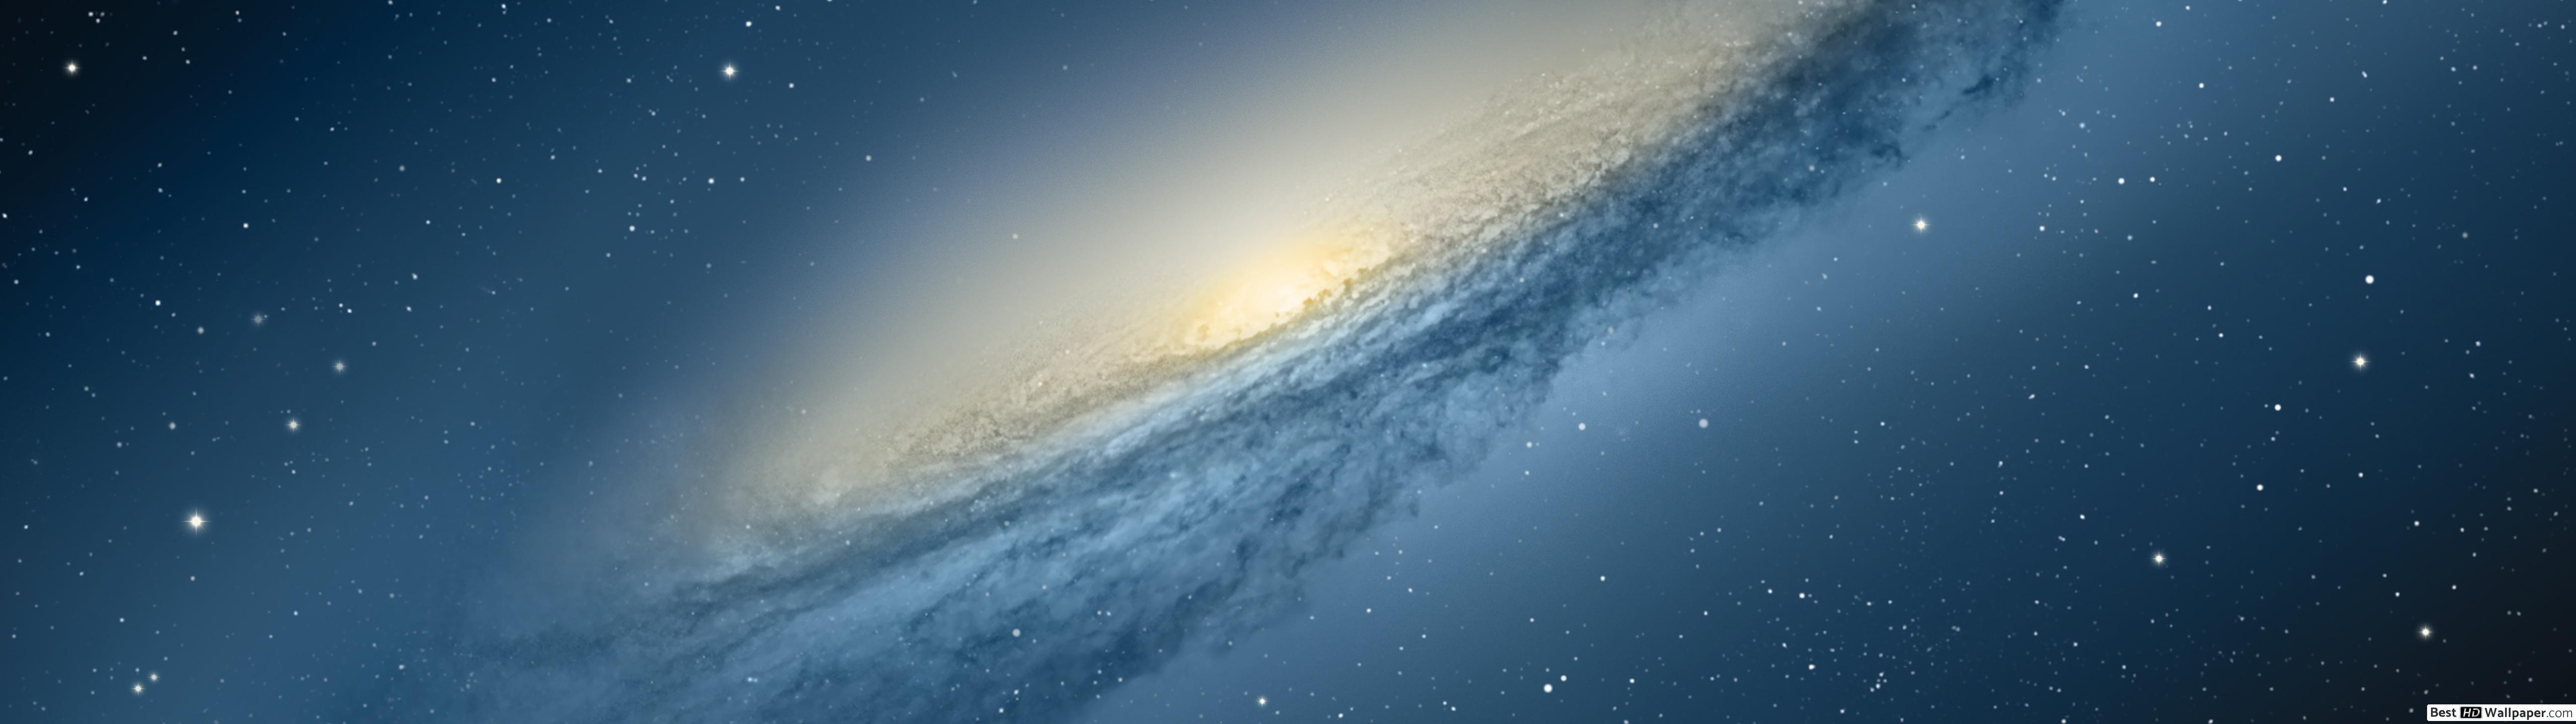 Ultrawide Wallpaper 5120x1440 Space 5120x1440 Space Wallpapers Top